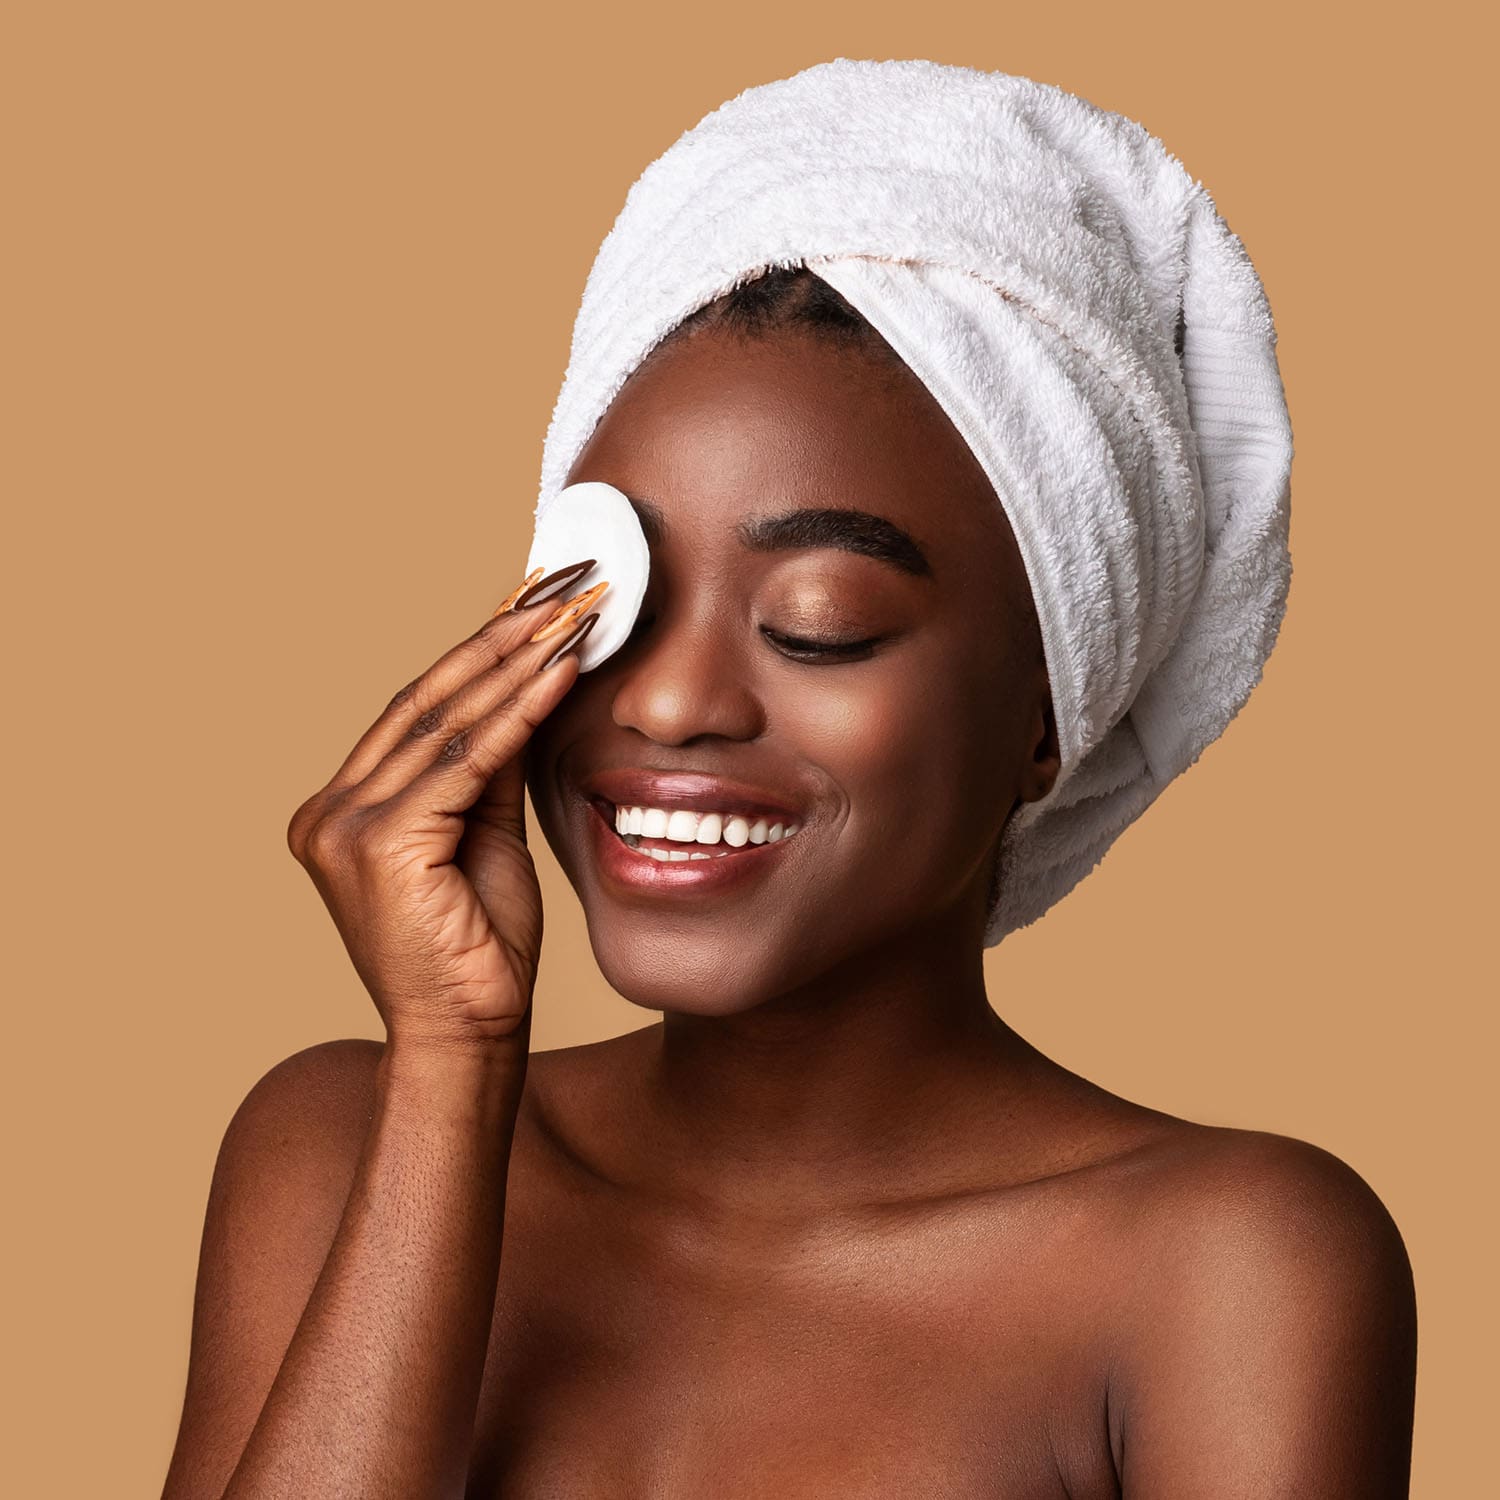 Woman with towel on her head smiling and removing makeup from her eye